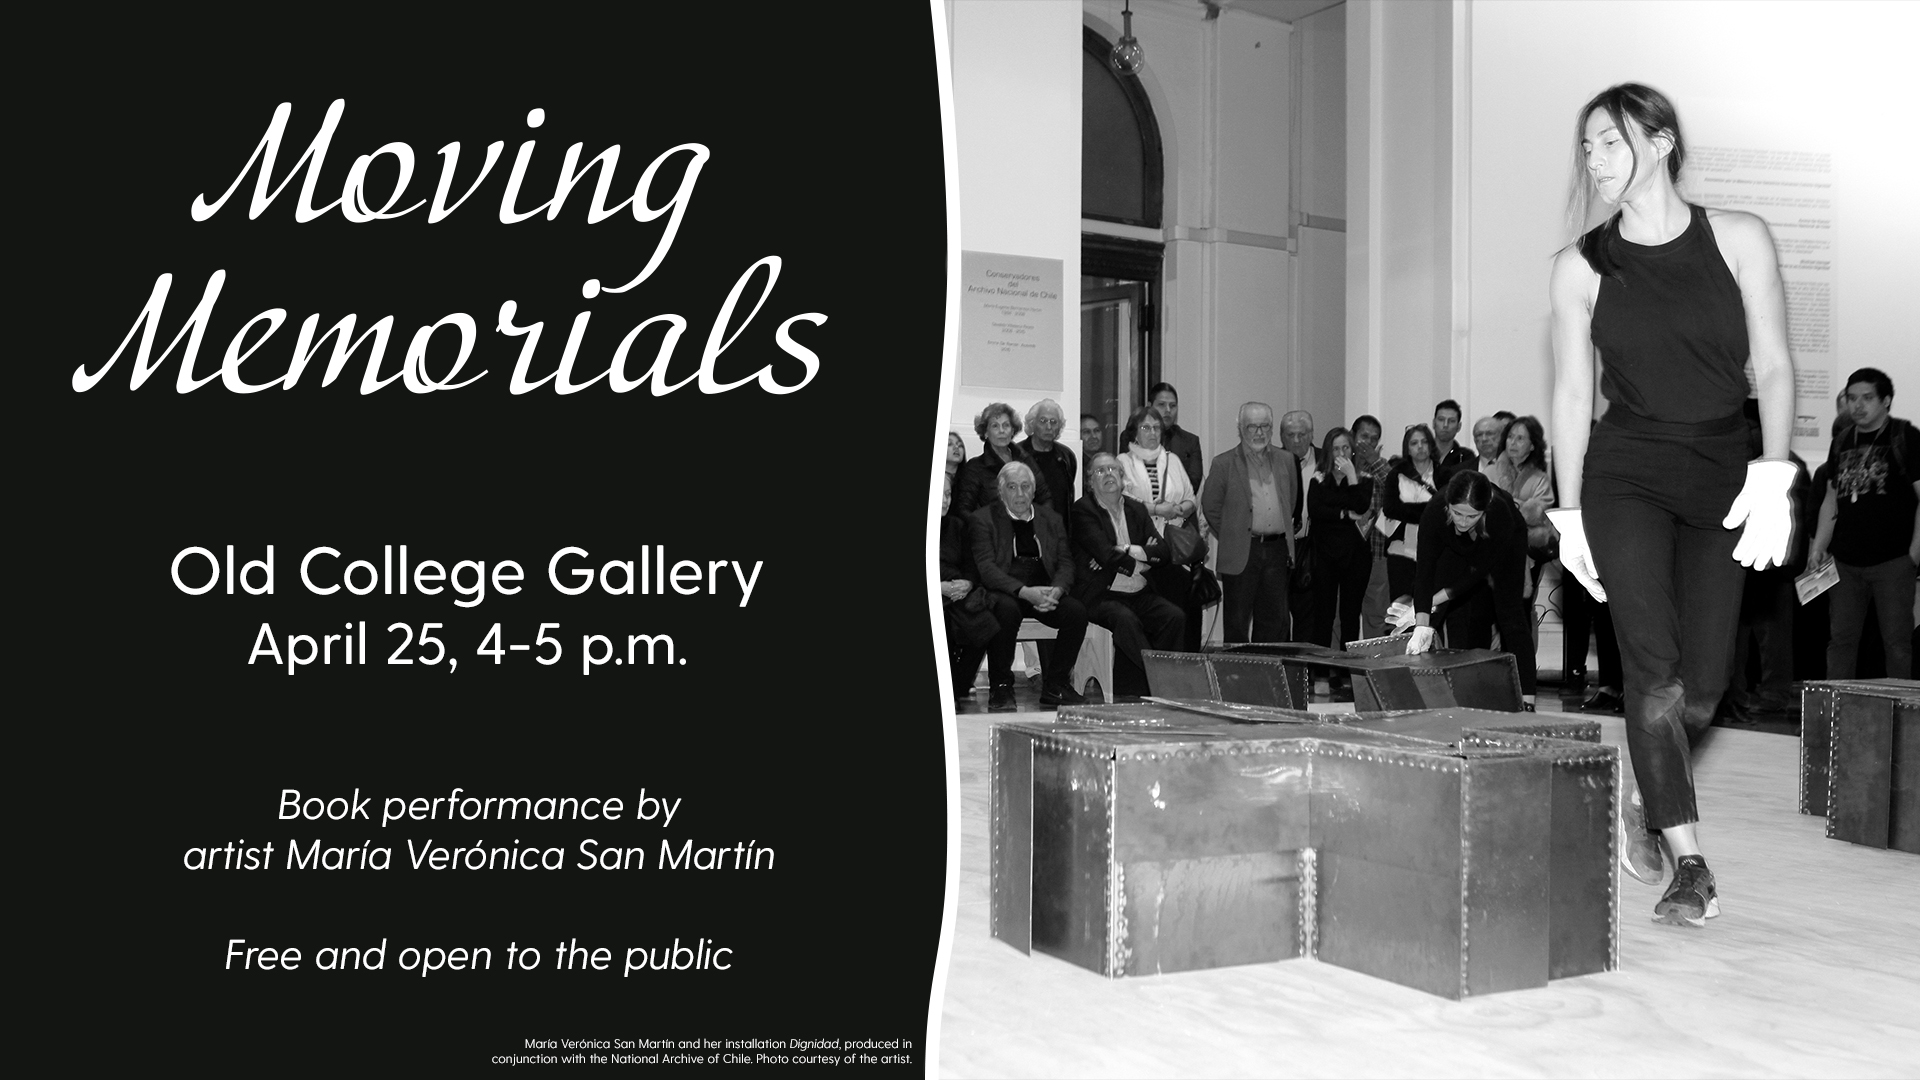 Promotional image for Moving Memorials performance